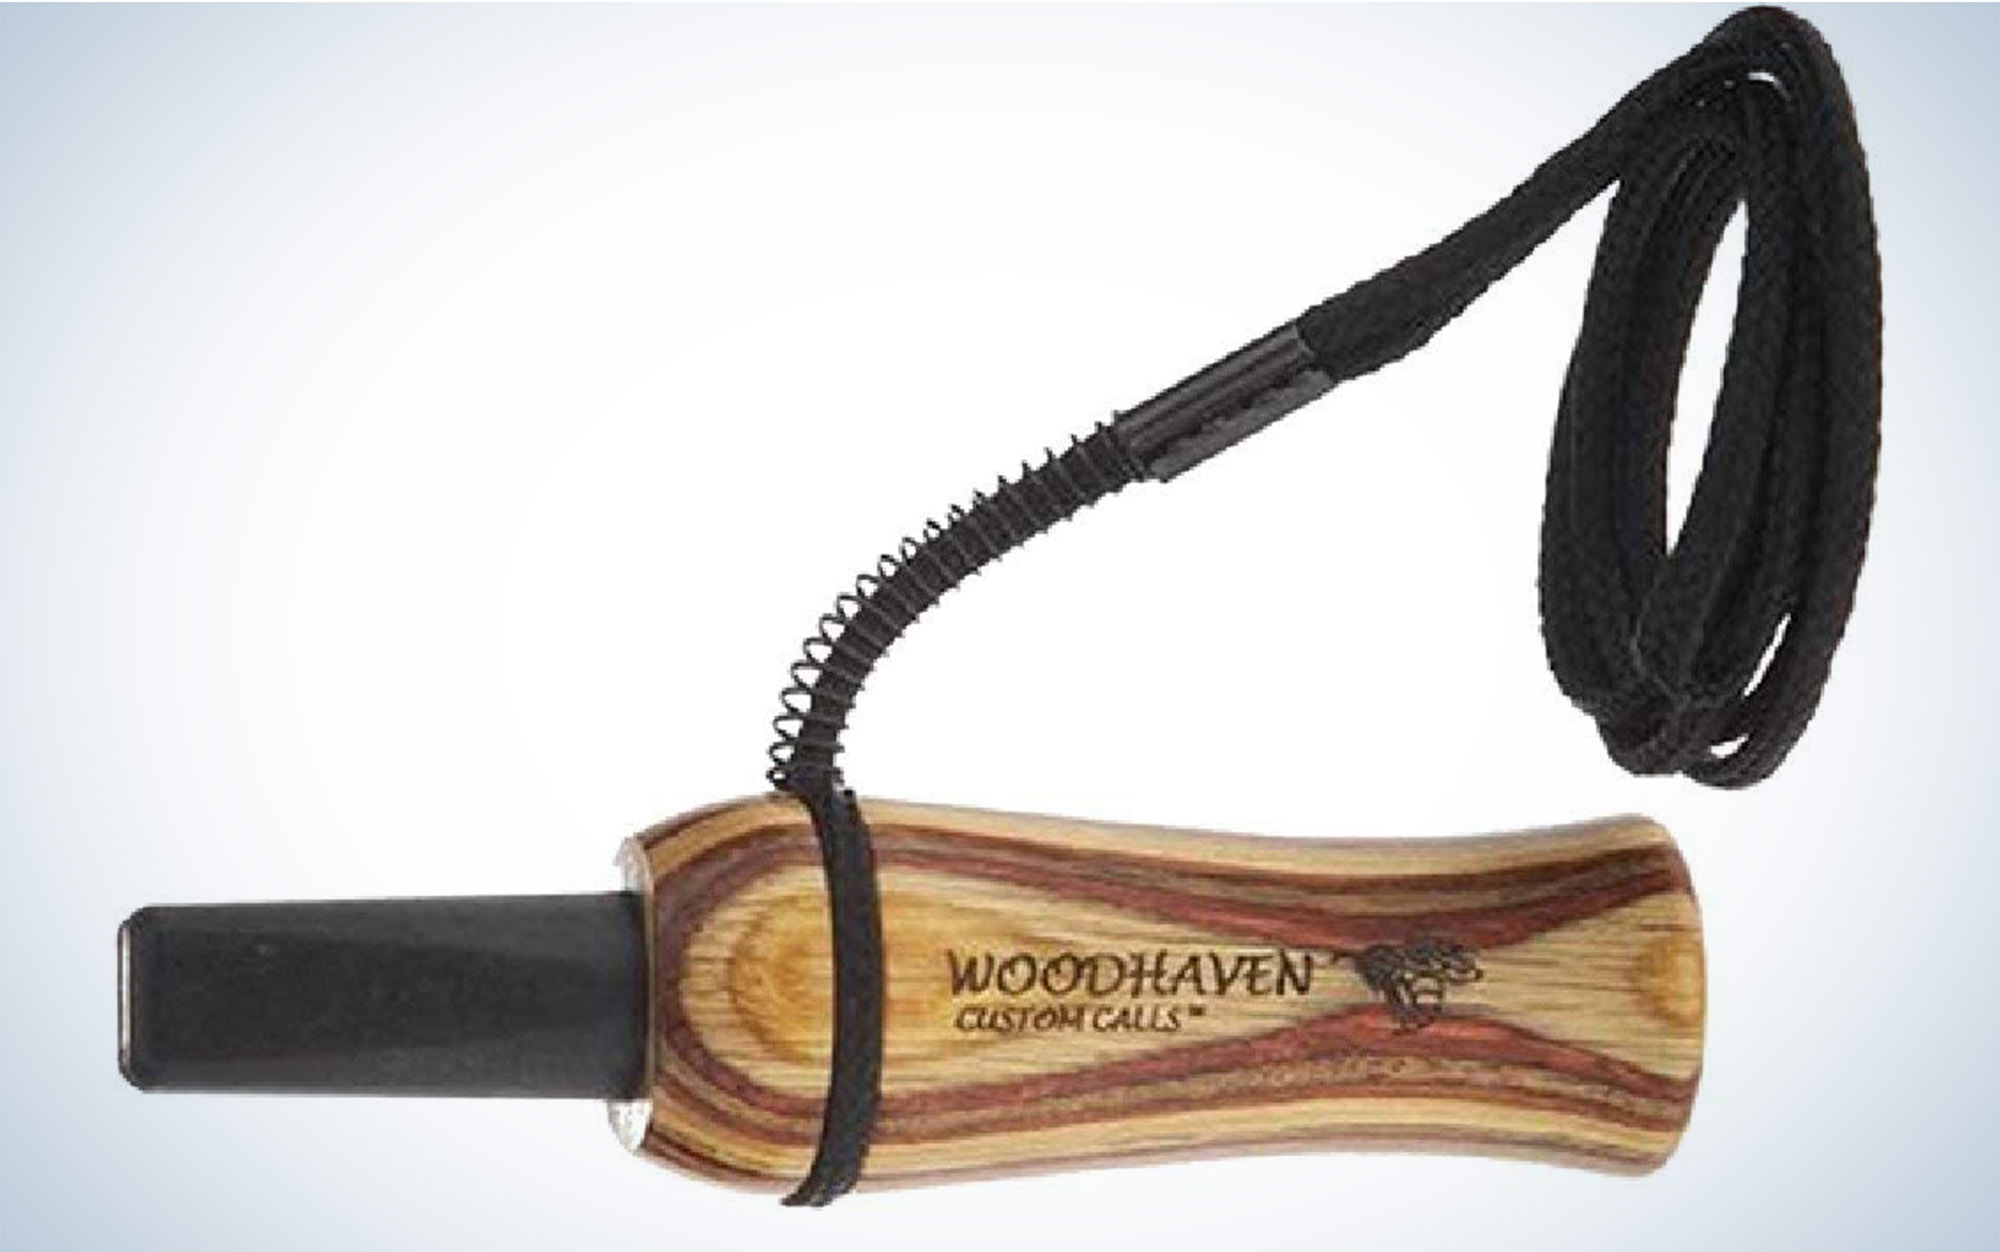 The Woodhaven Custom Calls The Real Crow is a crow call for turkey hunting.